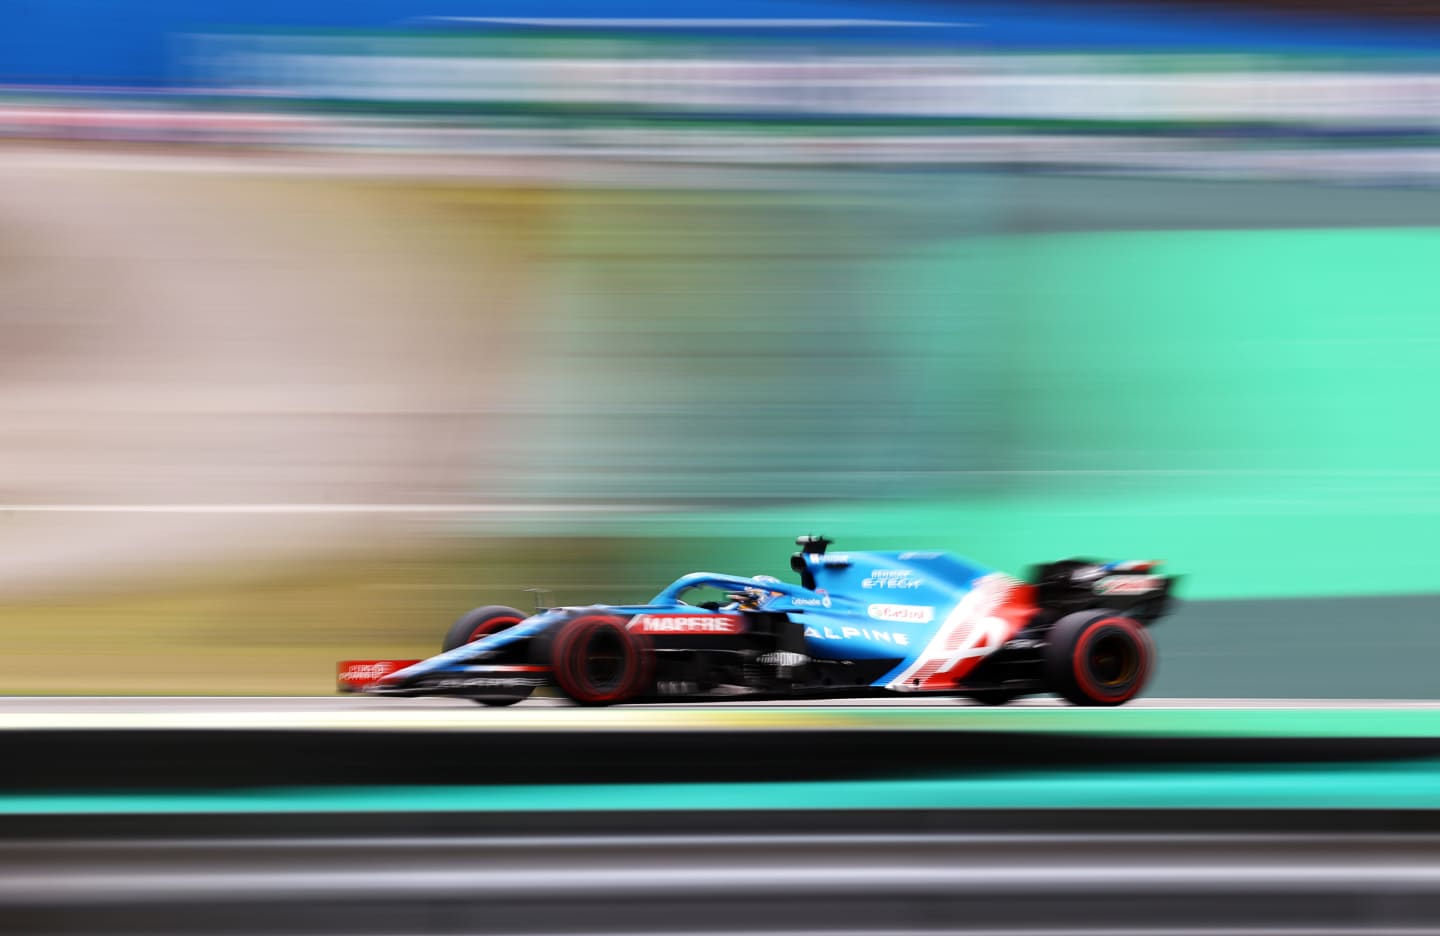 SAO PAULO, BRAZIL - NOVEMBER 12: Fernando Alonso of Spain driving the (14) Alpine A521 Renault during qualifying ahead of the F1 Grand Prix of Brazil at Autodromo Jose Carlos Pace on November 12, 2021 in Sao Paulo, Brazil. (Photo by Bryn Lennon - Formula 1/Formula 1 via Getty Images)